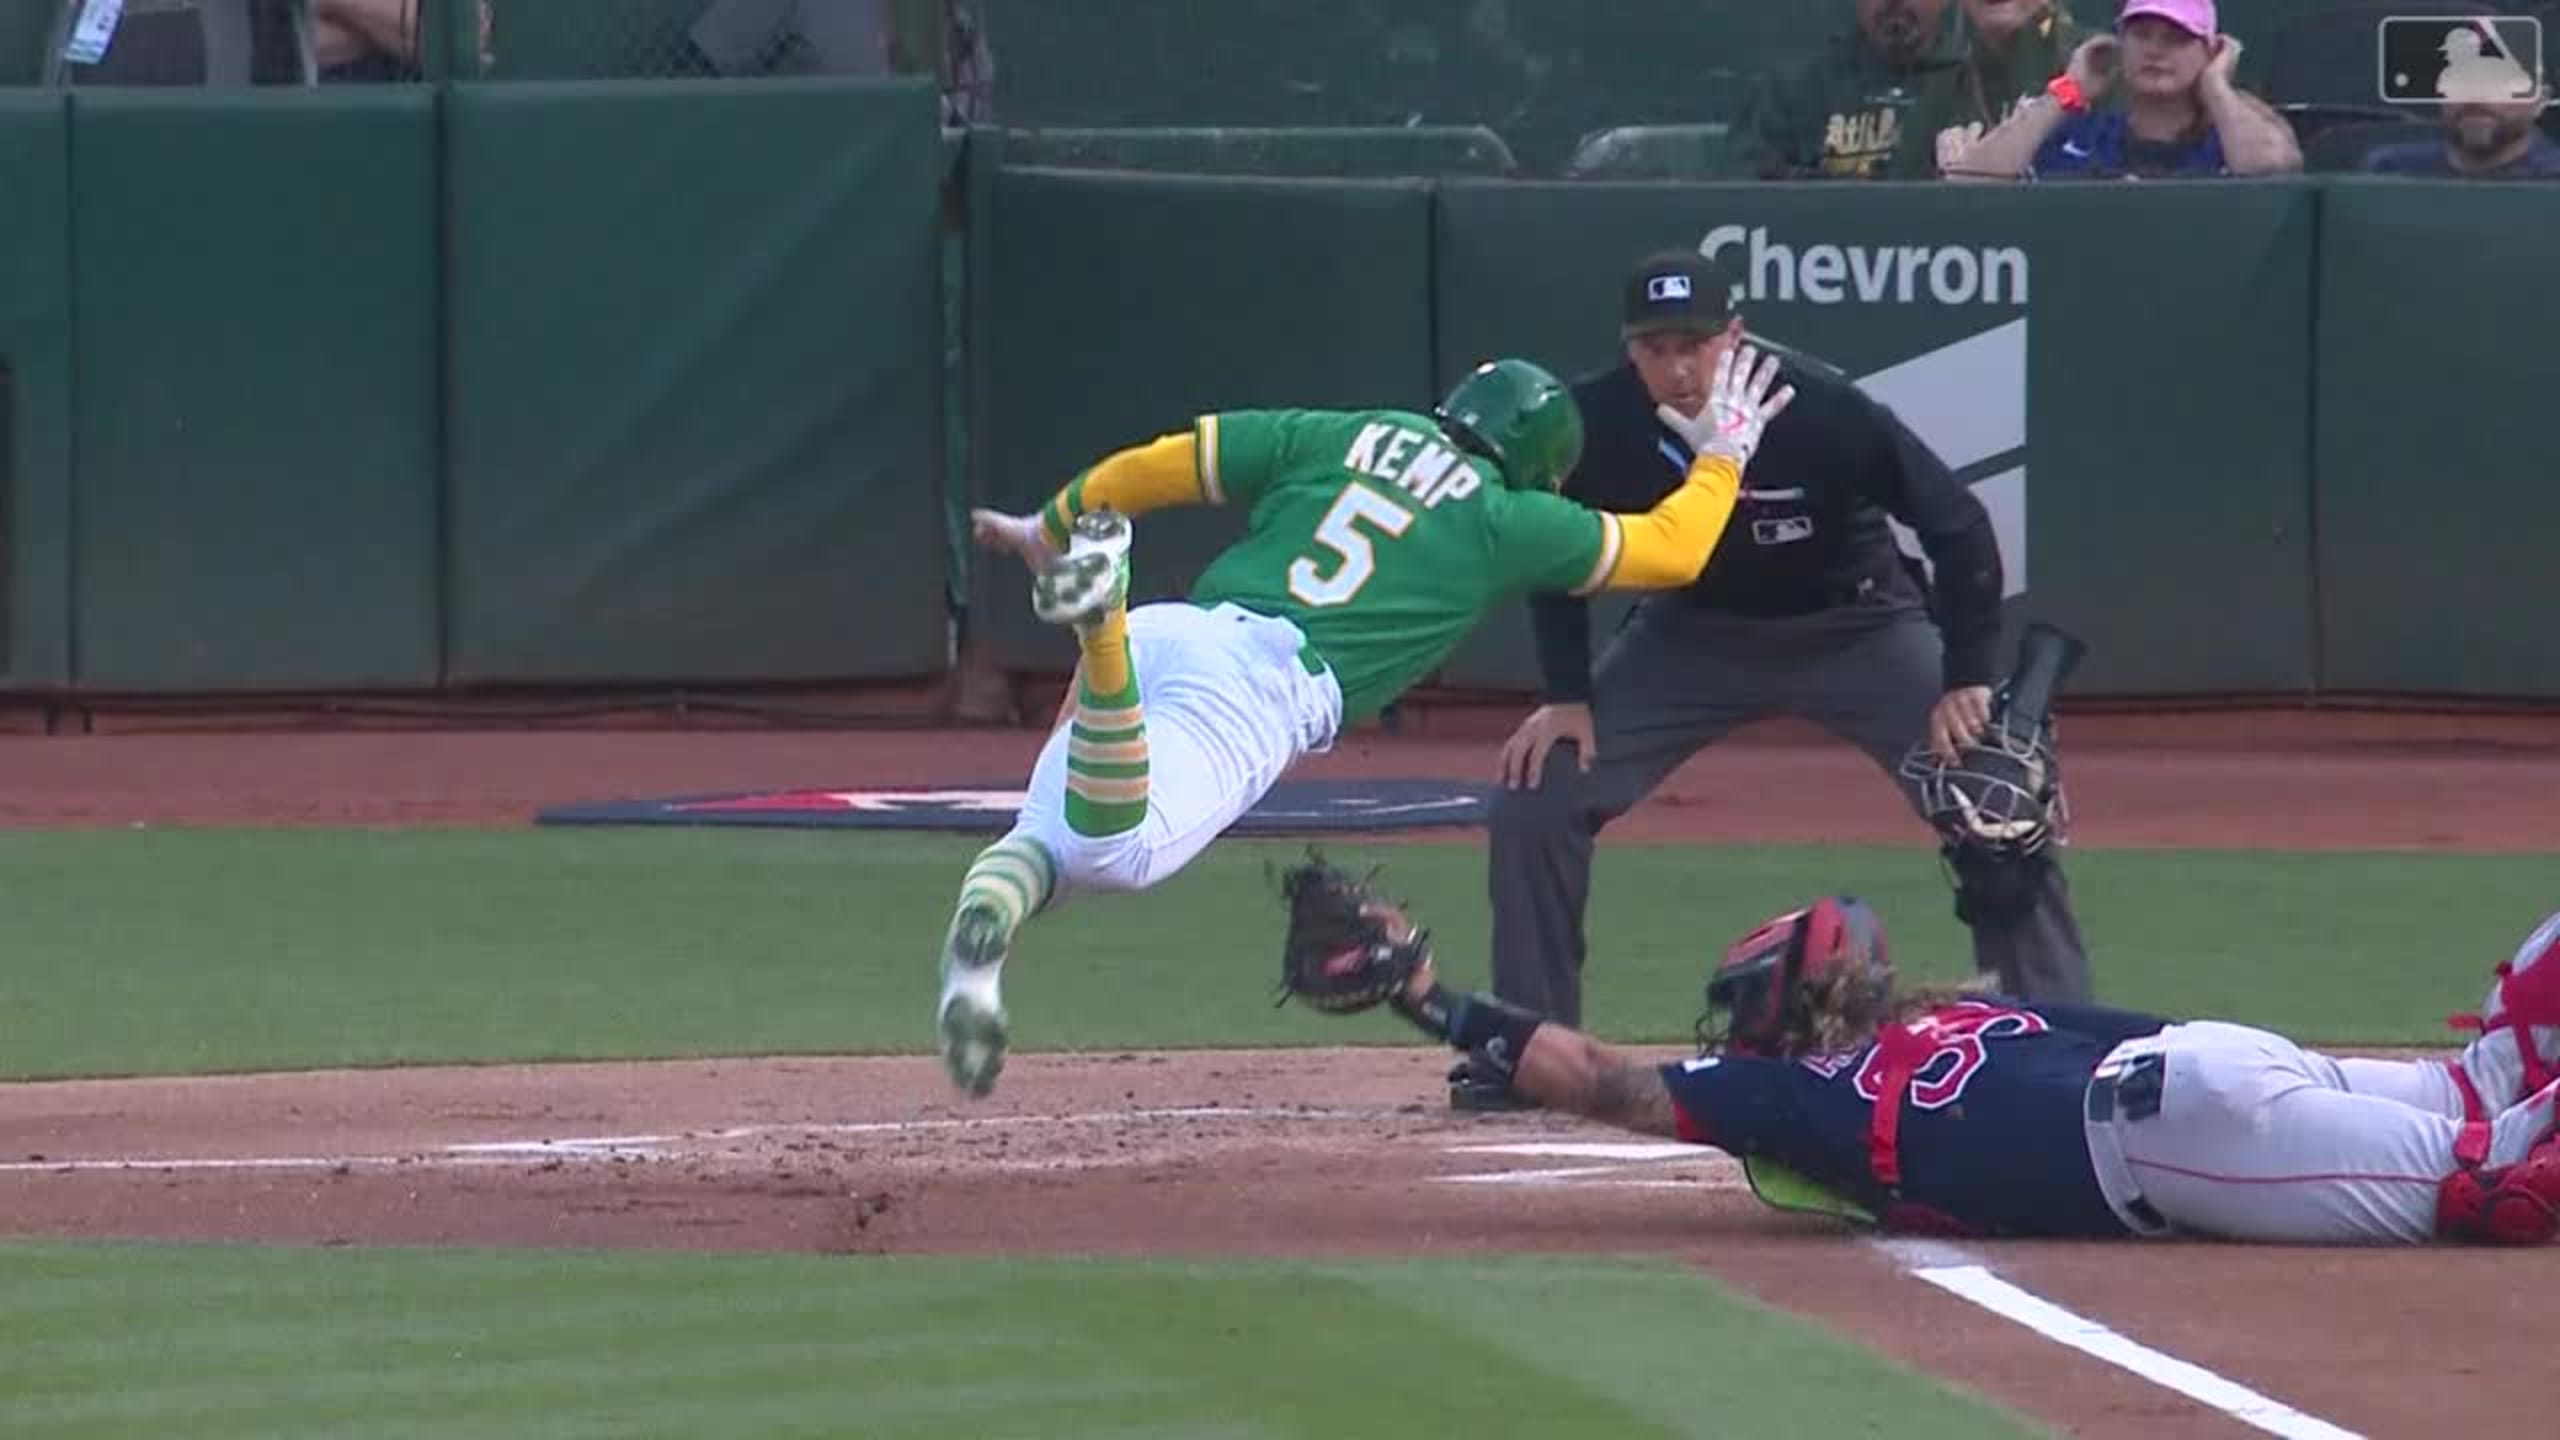 Colon, A's beat Red Sox 13-0 in rain-shortened game